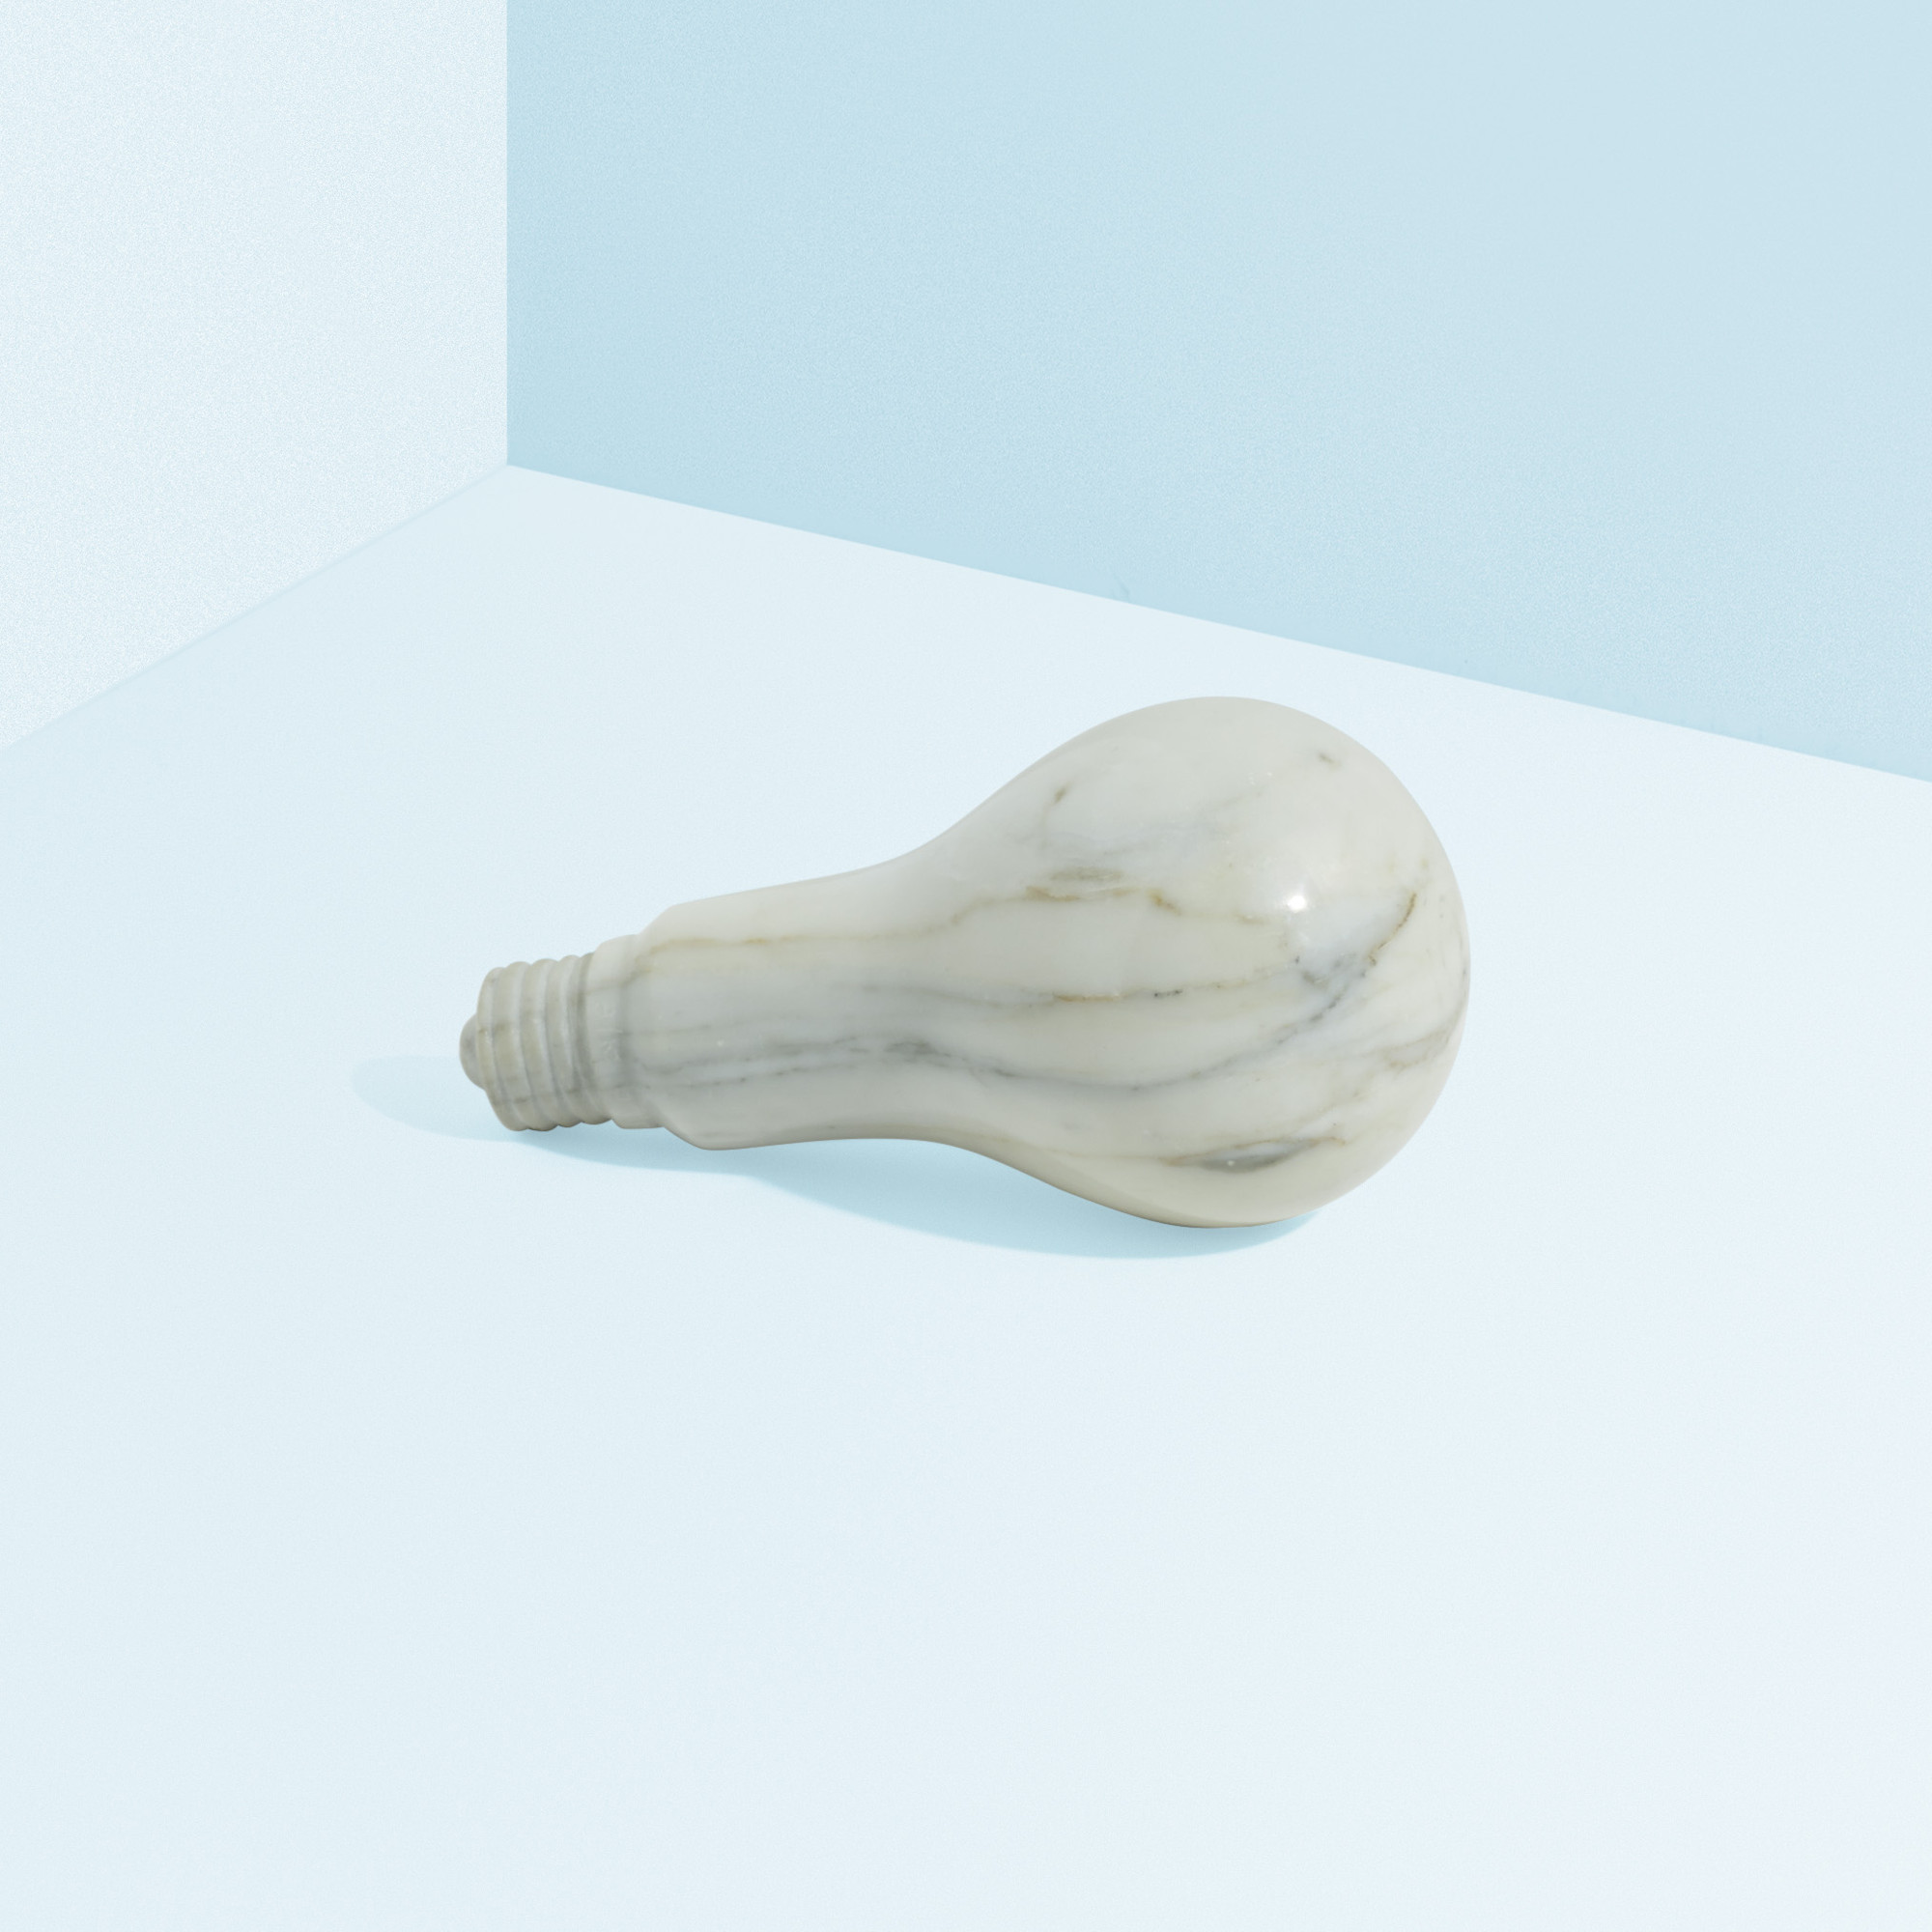 166_1_lawrence_laske_design_studio_and_collected_works_october_2014_roland_baladi_light_bulb__wright_auction